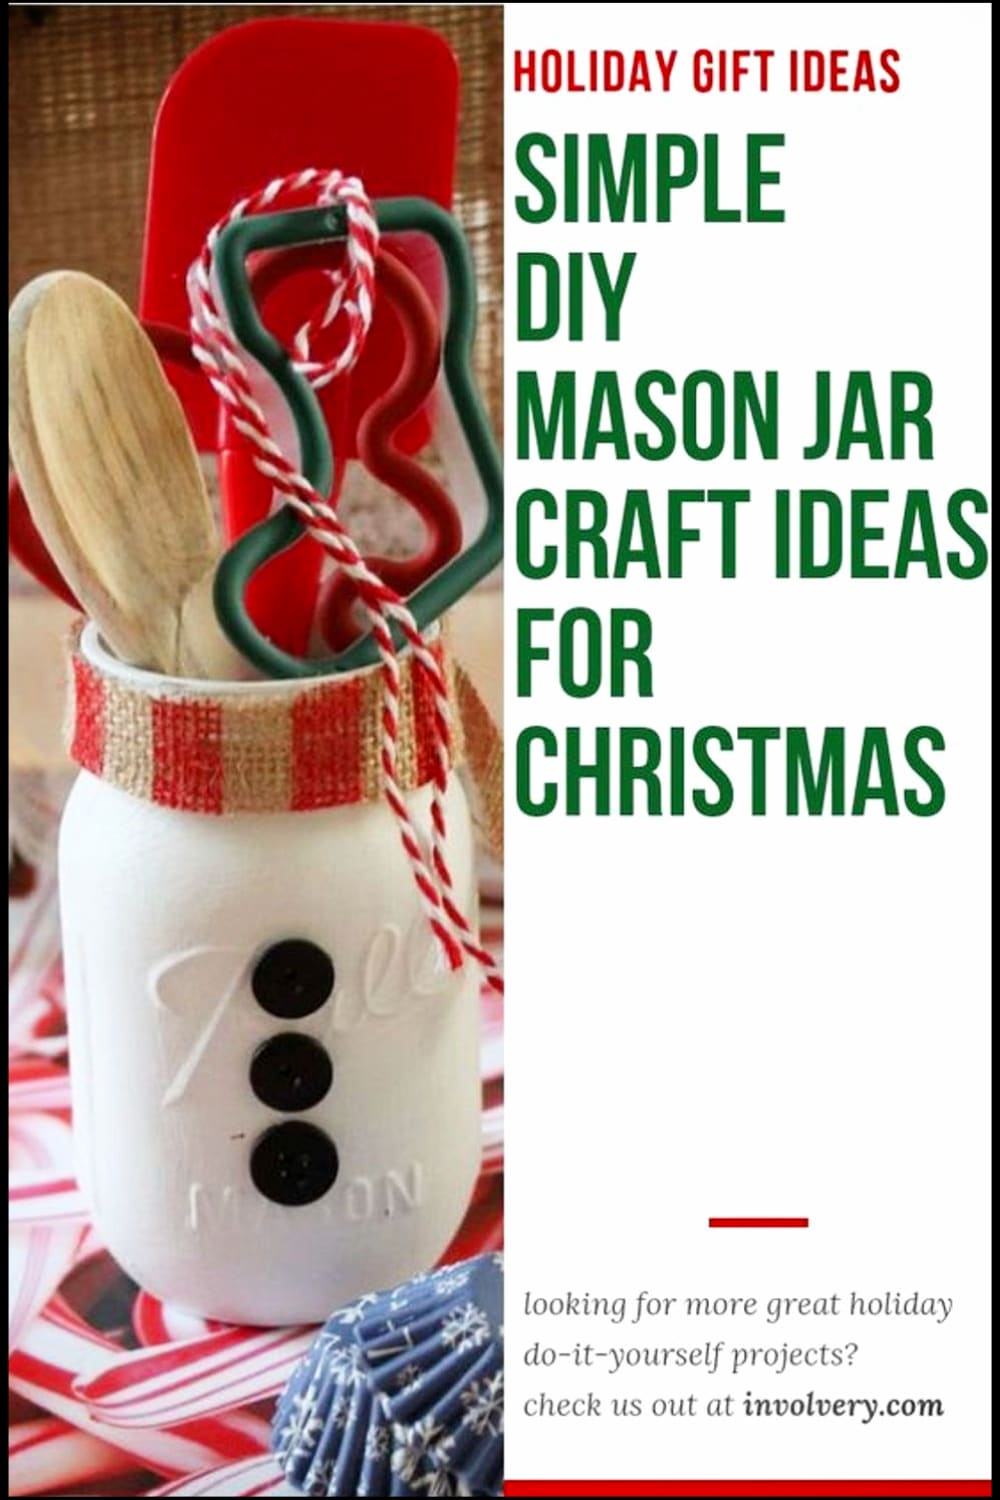 Mason Jar Gifts for Christmas - DIY Mason Jar Christmas Gifts and Crafts - Easy Mason Jar Christmas Gift Ideas for Homemade Holiday Gifts for Neighbors, teachers, friends, co-workers and family. Easy DIY Christmas mason jars and Christmas mason jar decorating ideas - how to decorate mason jars for Christmas gifts - DIY Mason Jar Gifts and Cute Mason Jar Ideas For Christmas Presents